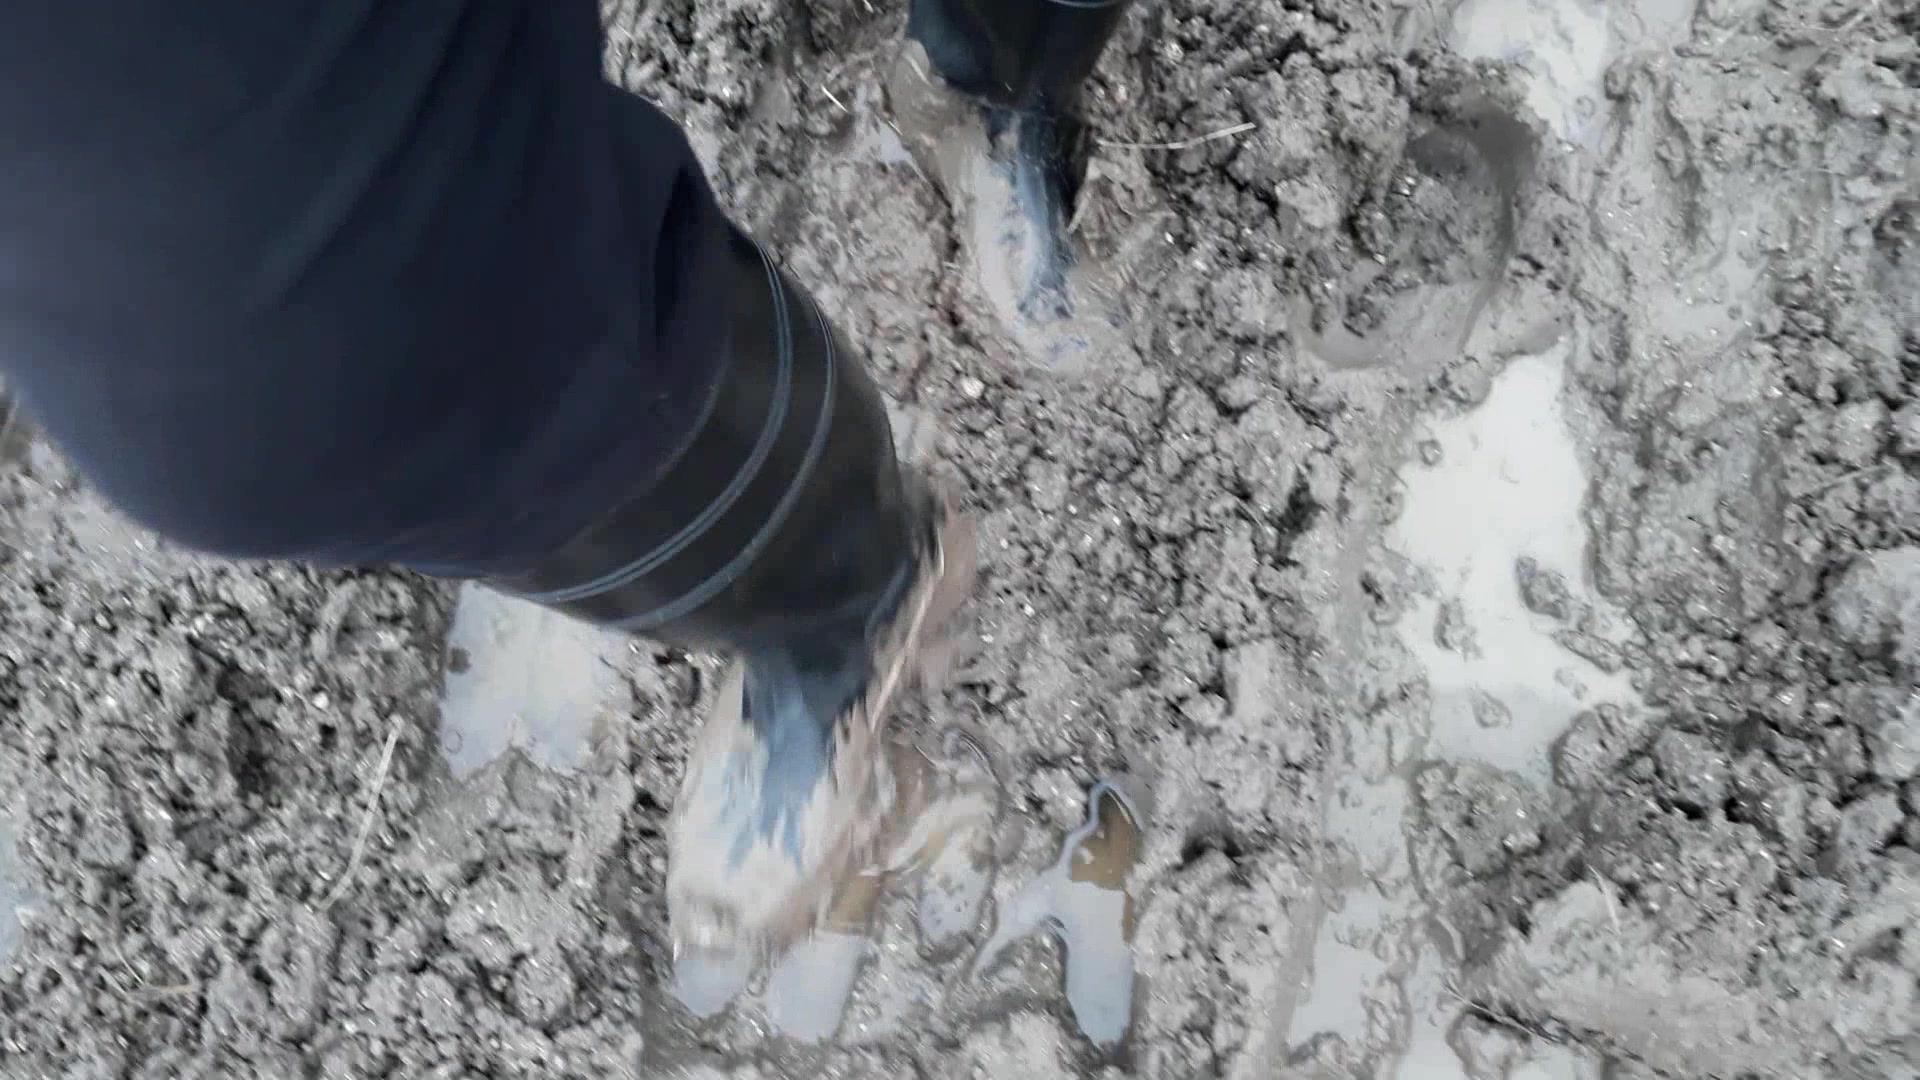 Rubber boots in mud - video 3